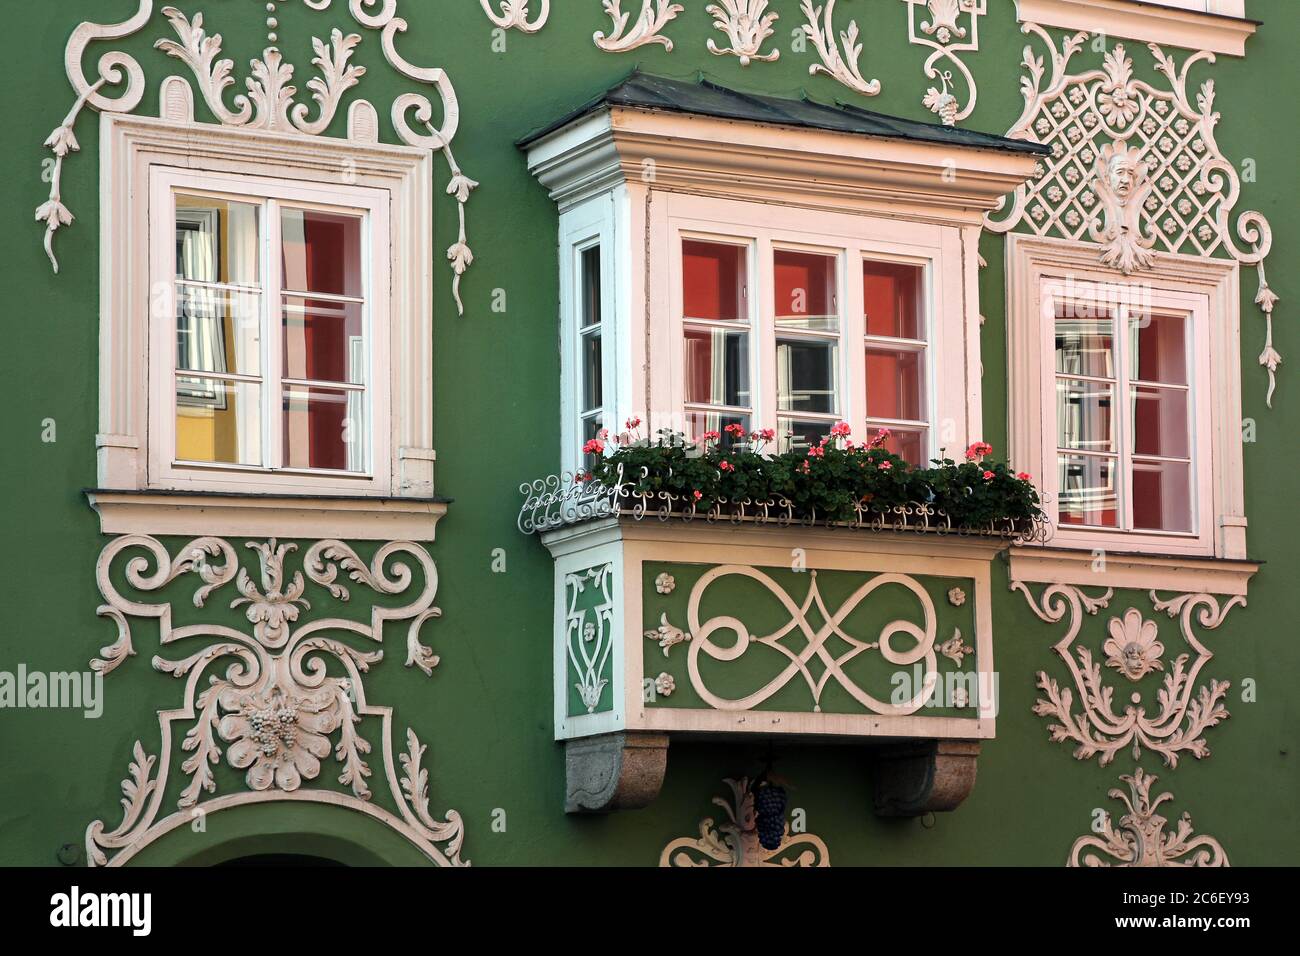 Facade of a beautiful green baroque house in Scharding, Austria featuring a small oriel window decorated with pink geranium flowers. Stock Photo